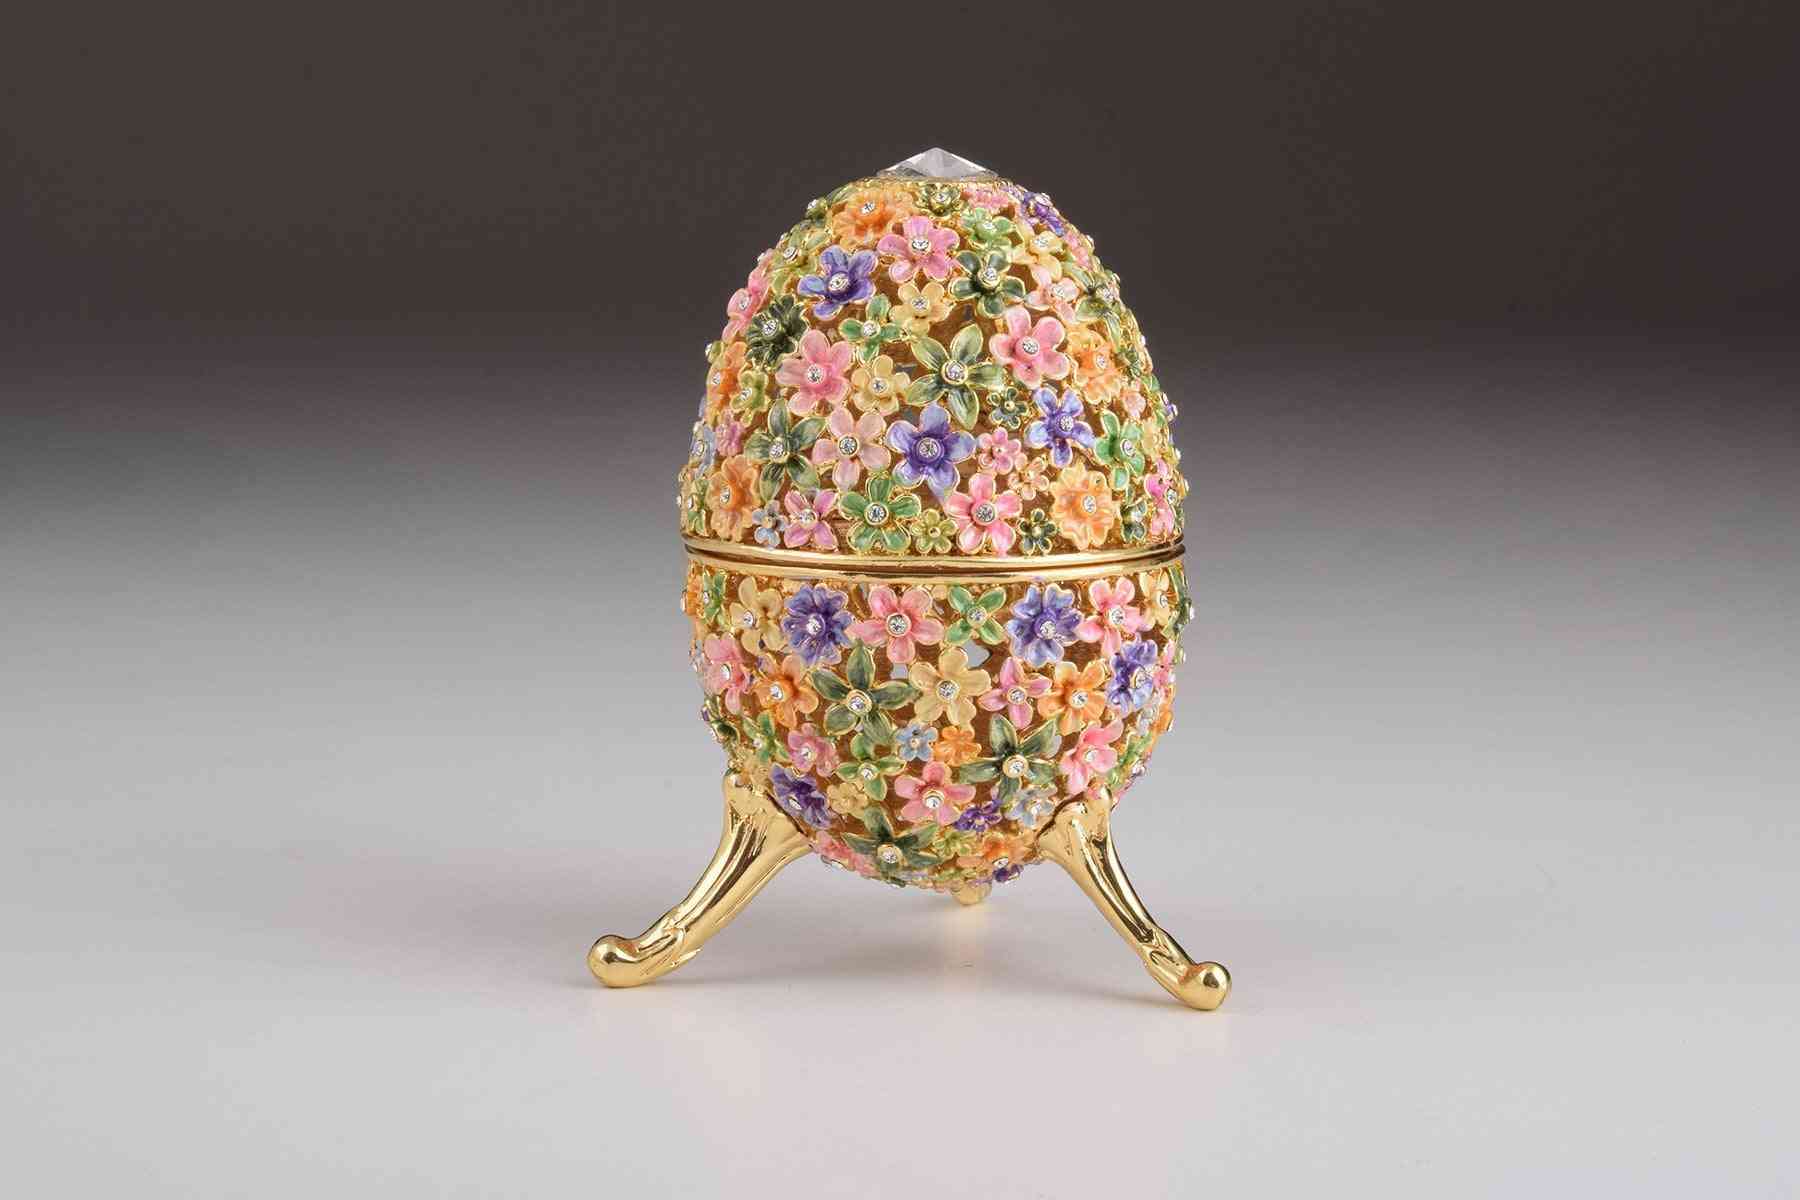 Gold With Colorful Flowers Easter Egg - Trinket Box